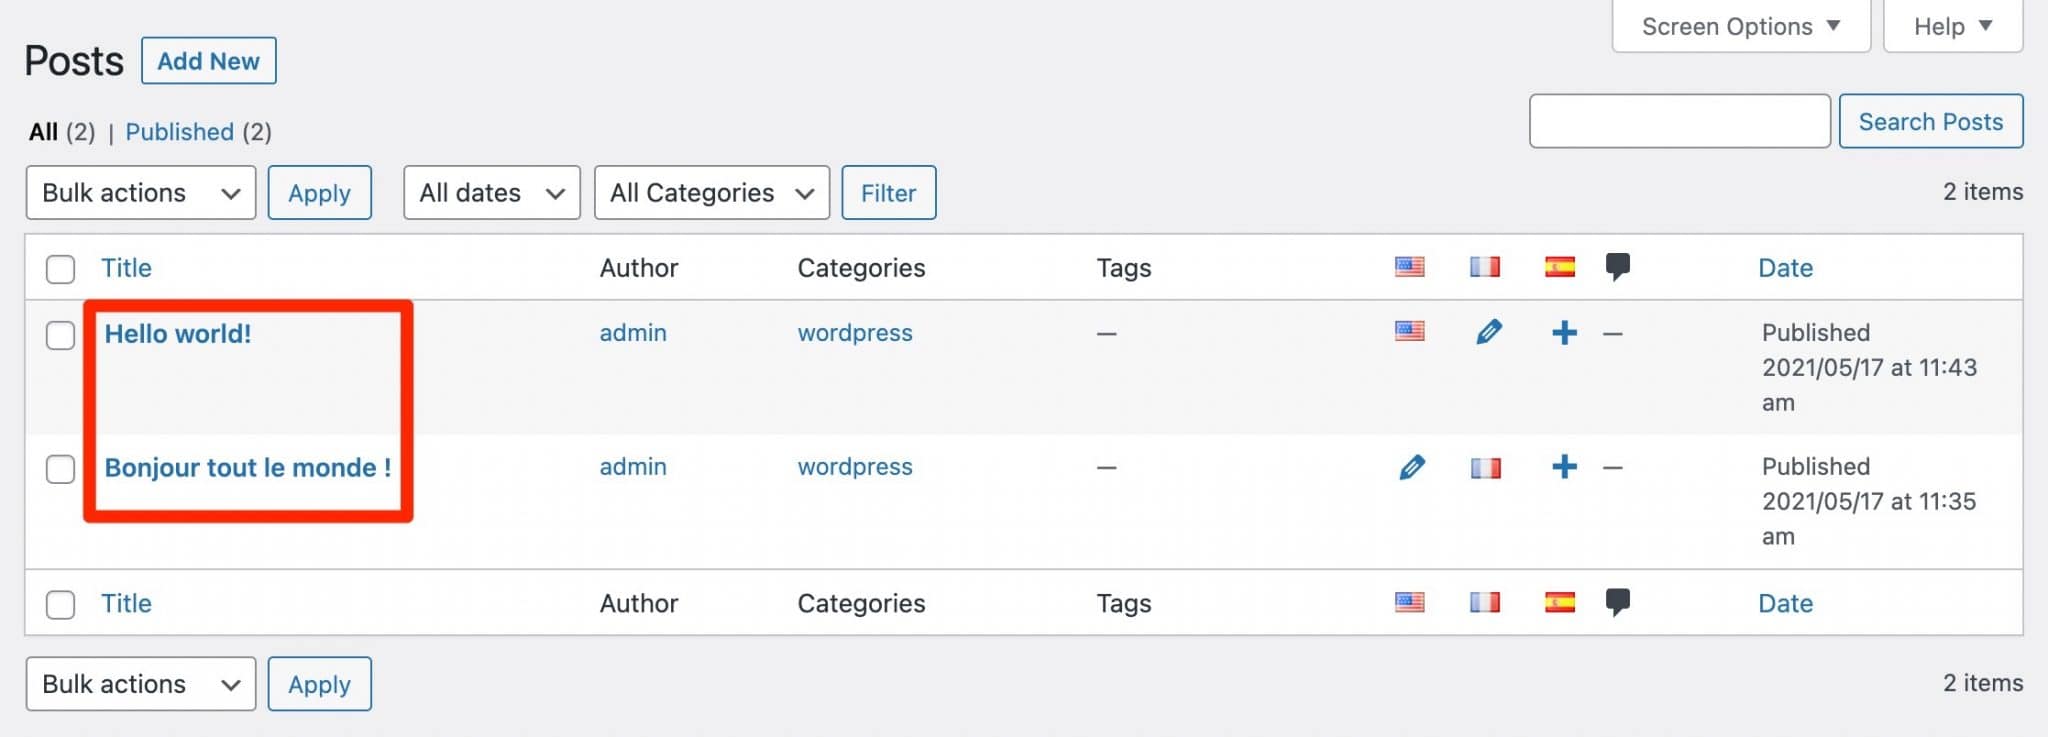 All posts on the WordPress admin dashboard displaying different flags and translation options.